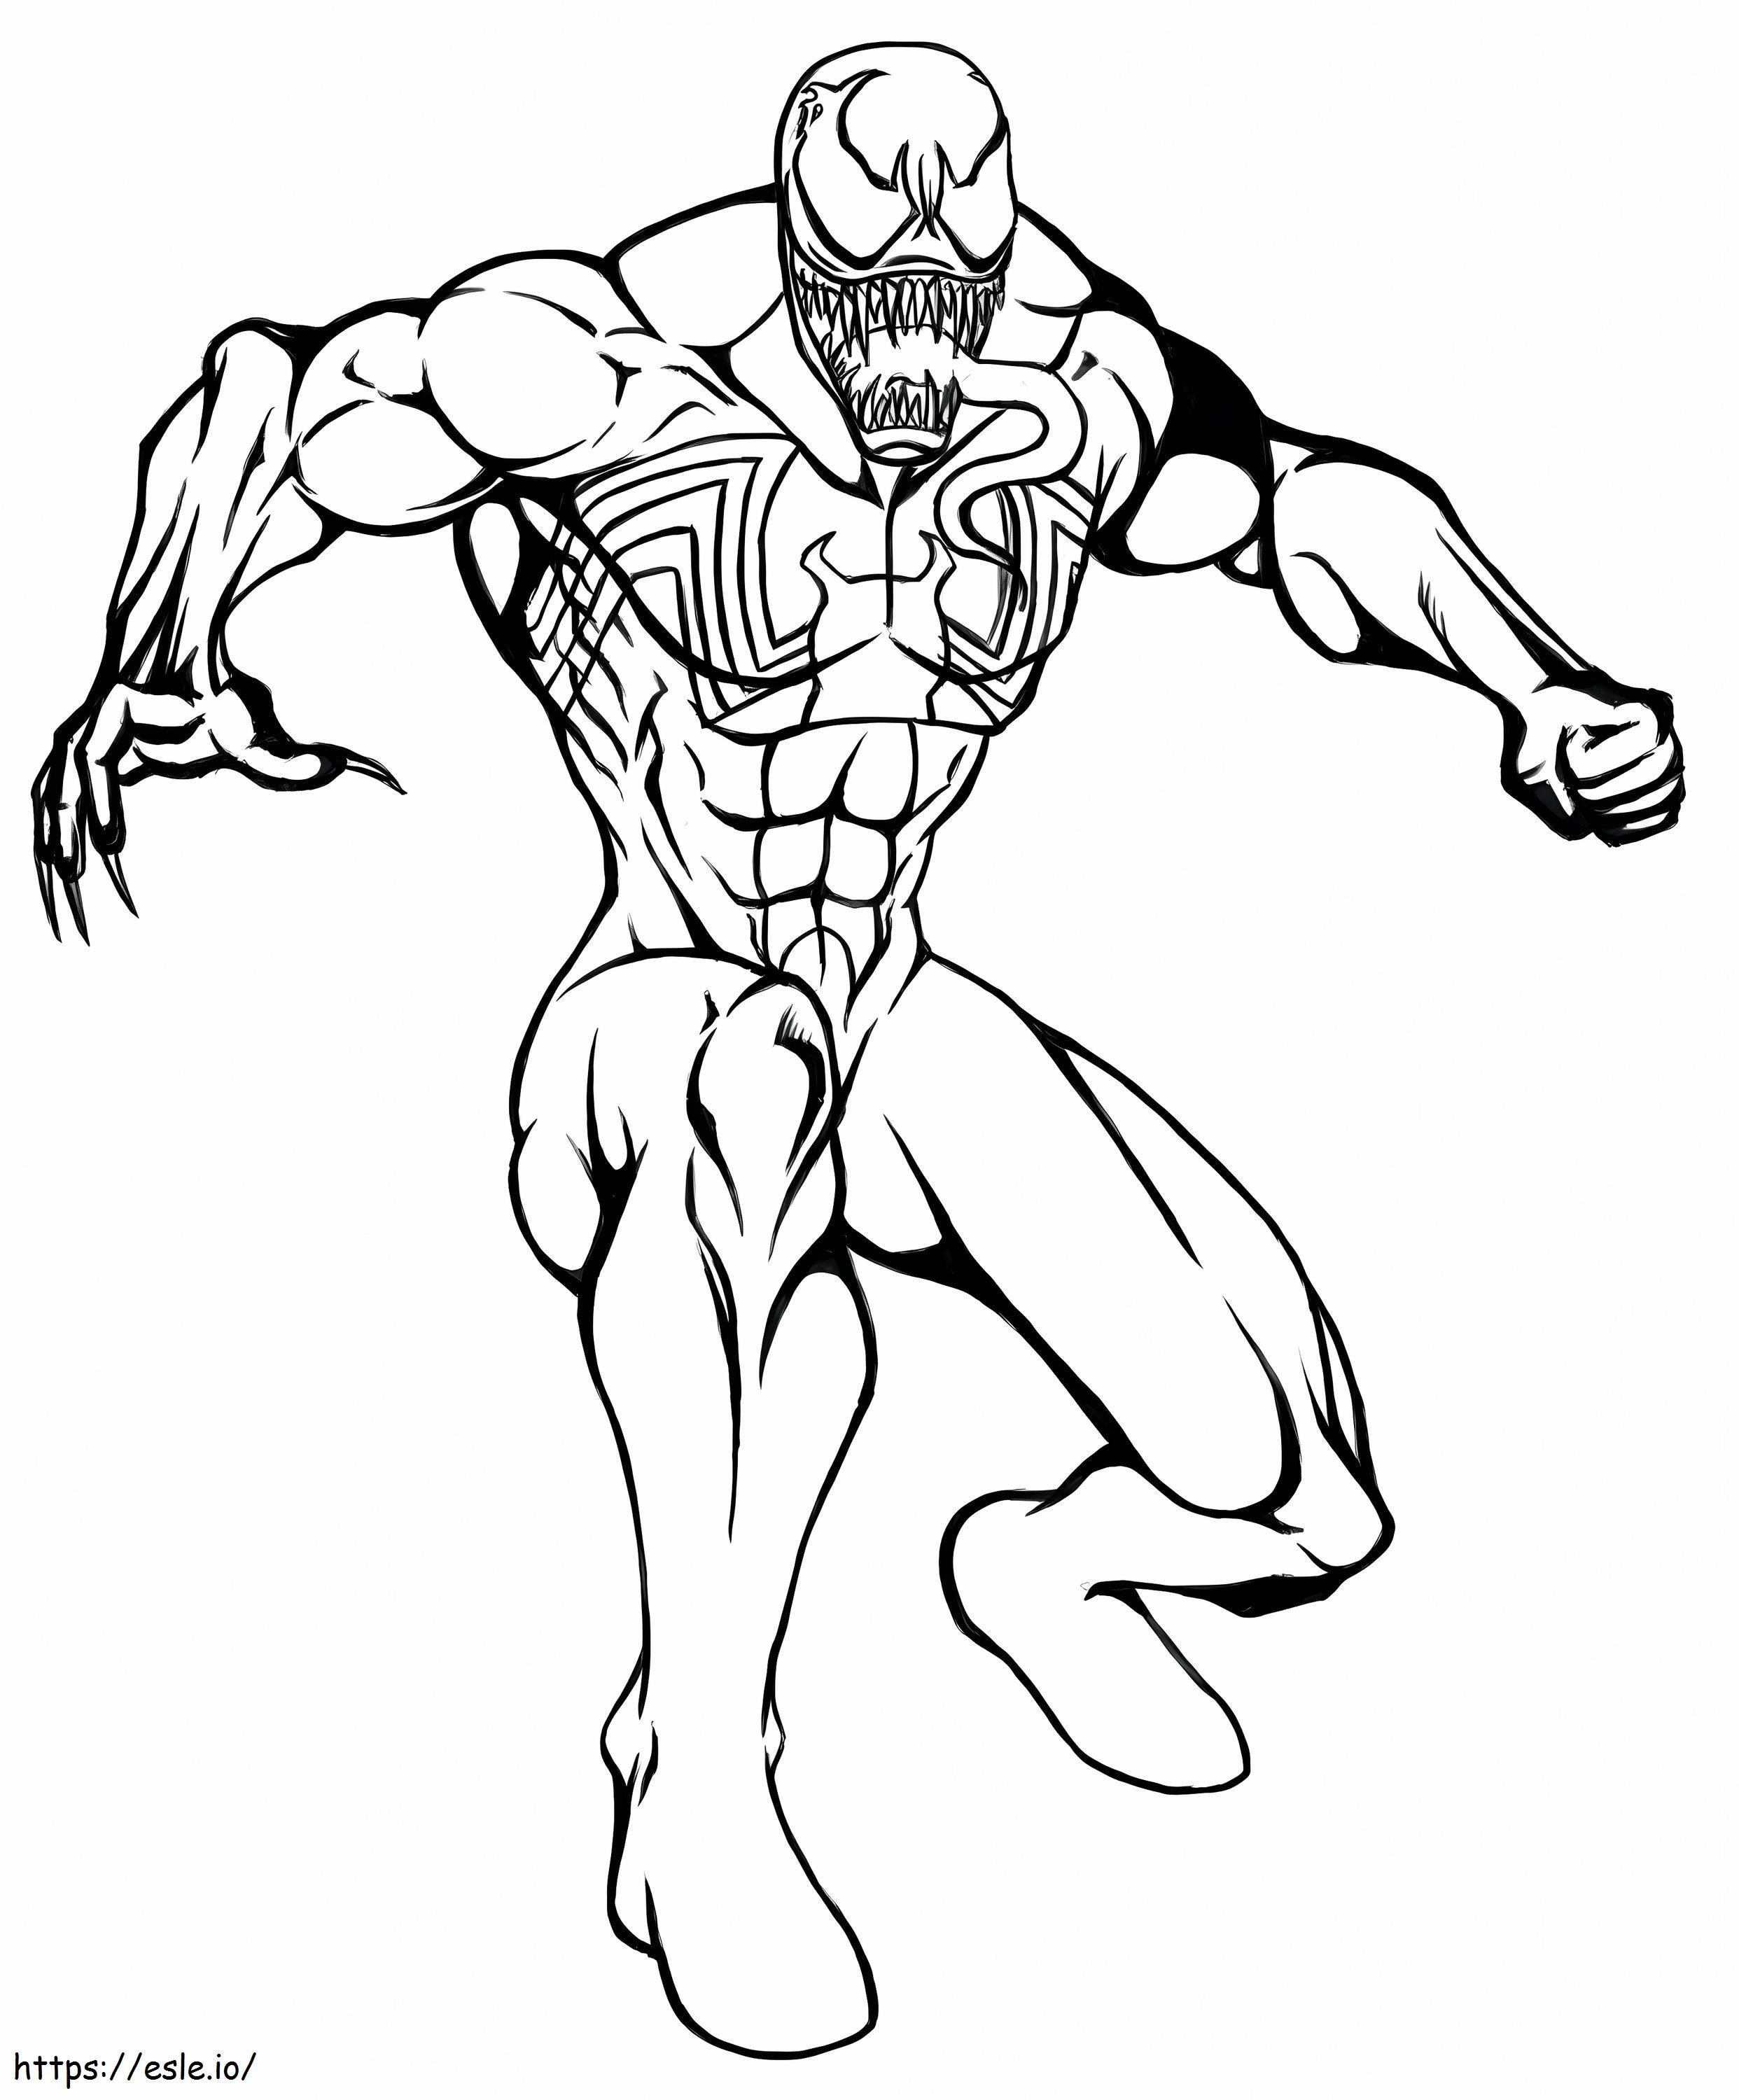 1532570377 Venom Fighting A4 coloring page